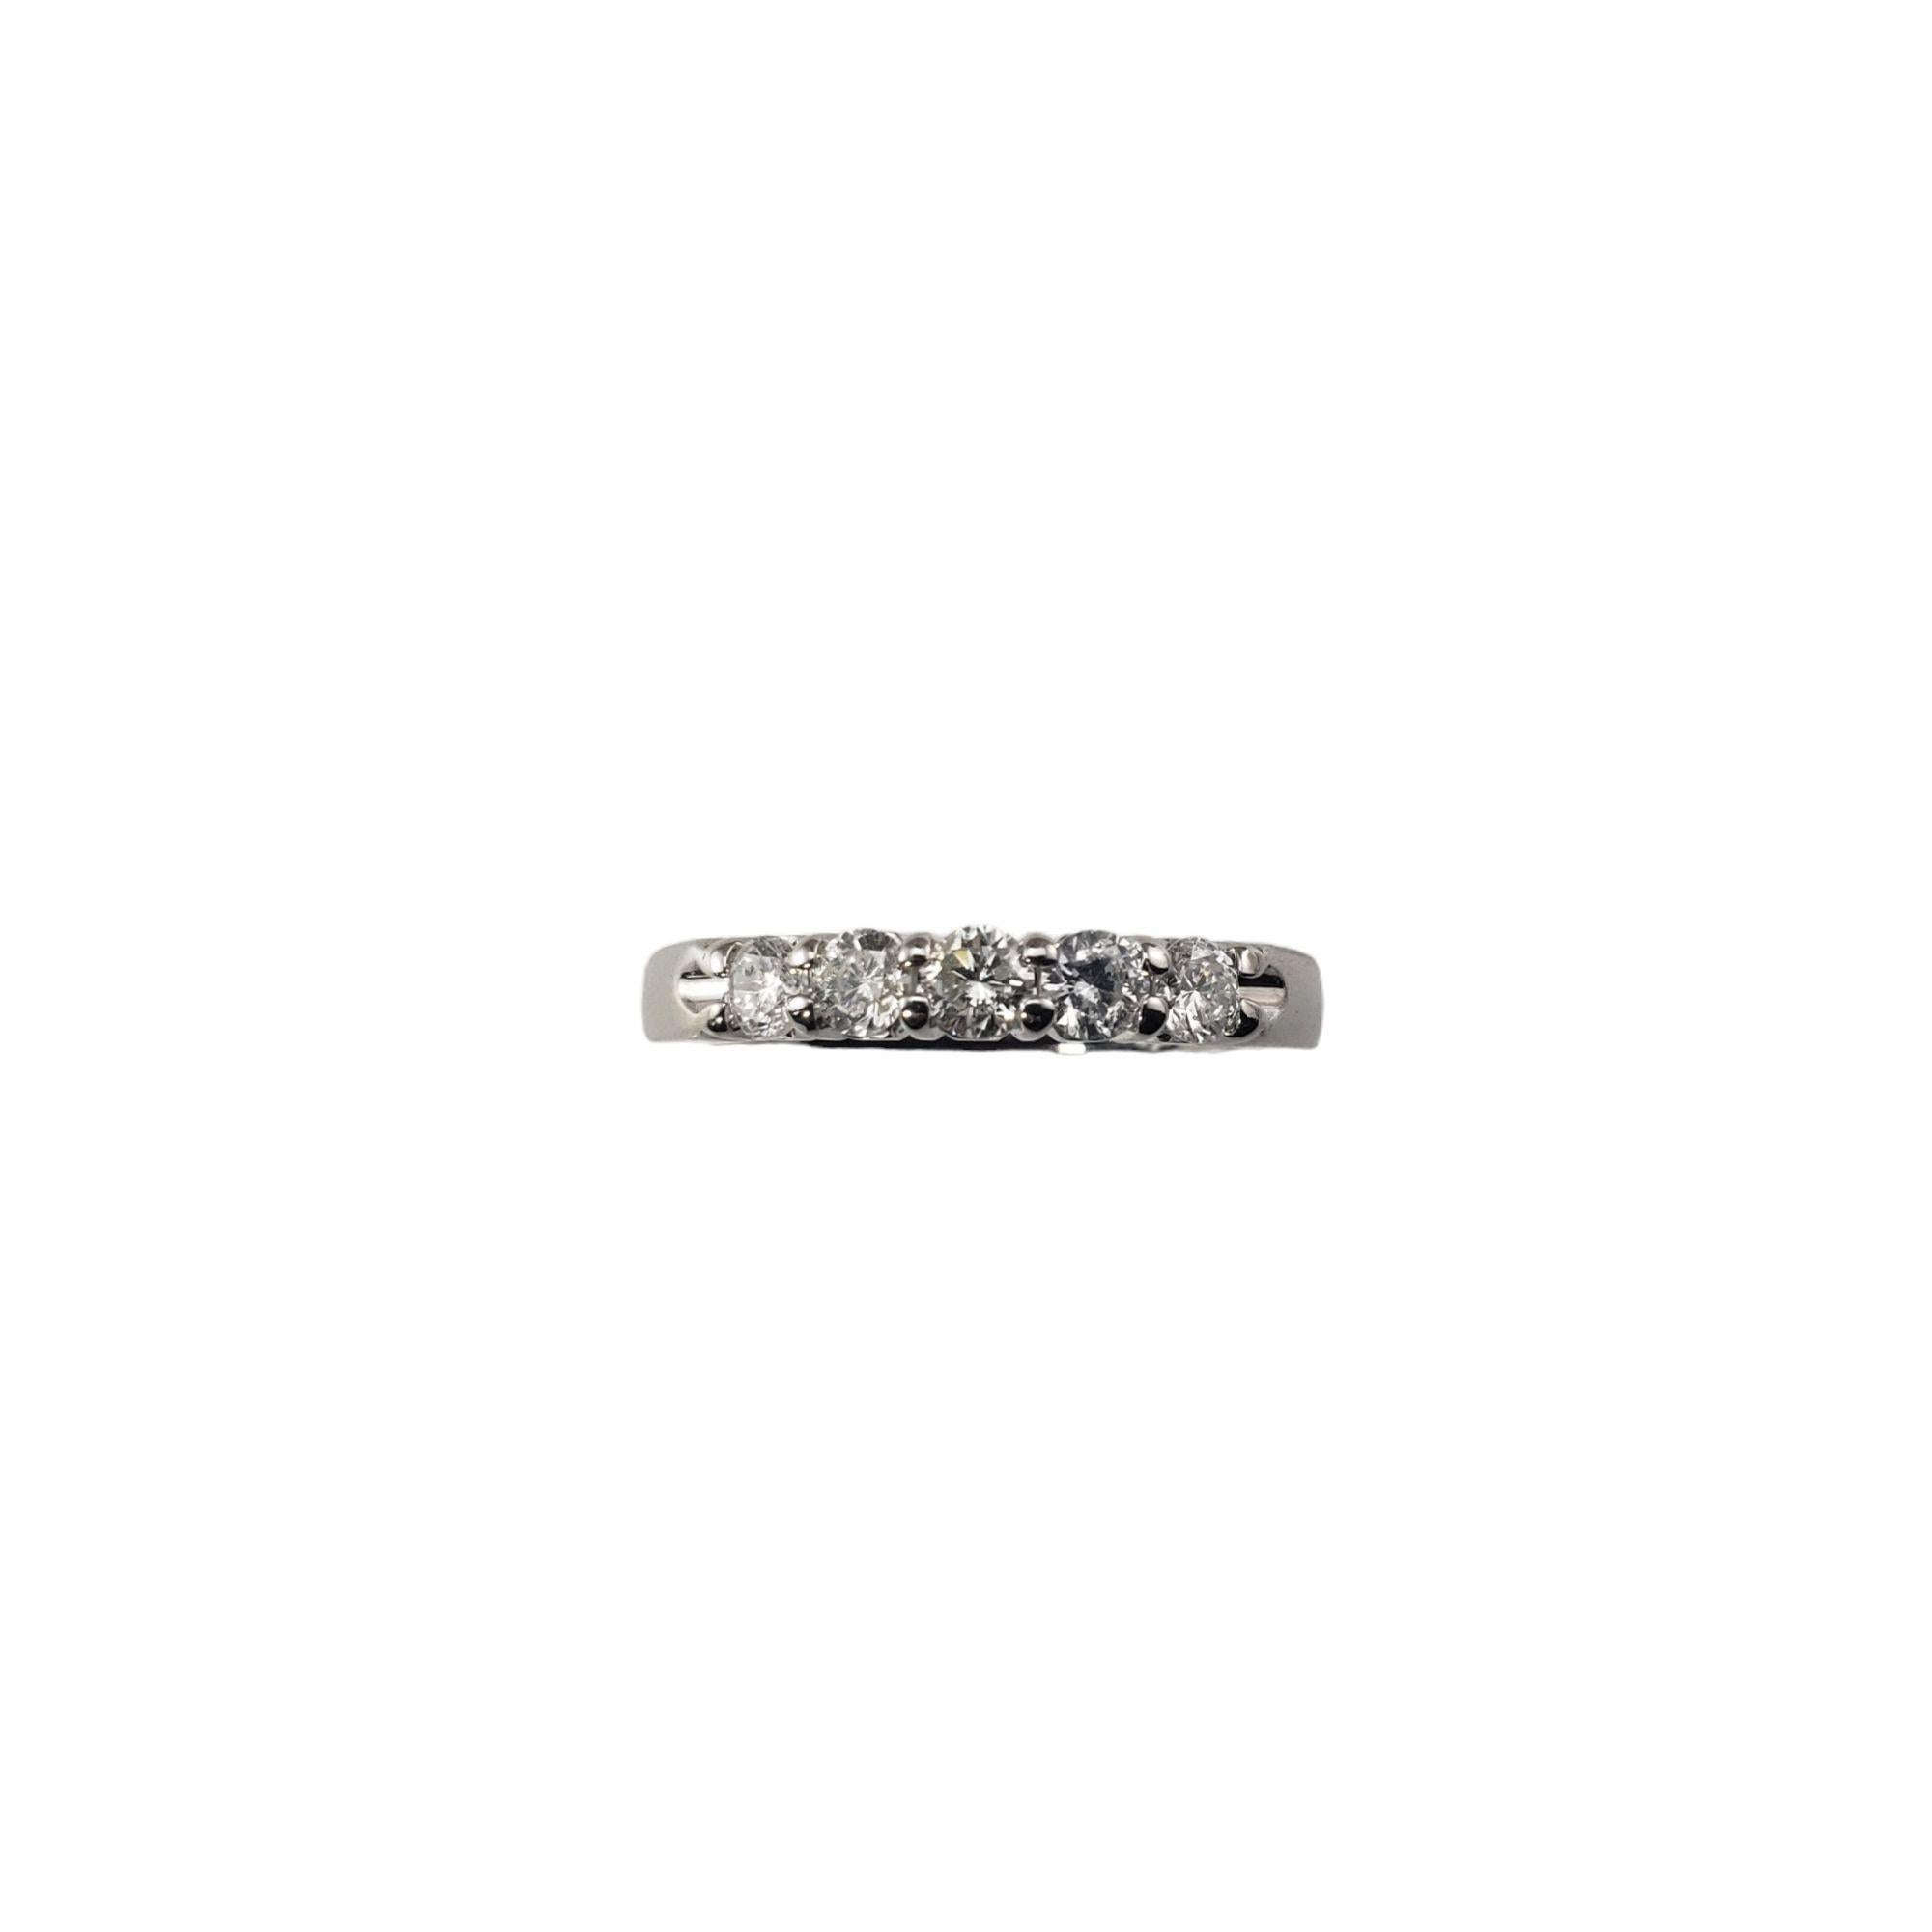 Platinum and Diamond Wedding Band Ring Size 4.75 JAGi Certified-

This sparkling band features five round brilliant cut diamonds set in classic platinum. Width: 3 mm.

Total diamond weight: .45 ct.

Diamond color: H-I

Diamond clarity: I1-I2

Ring